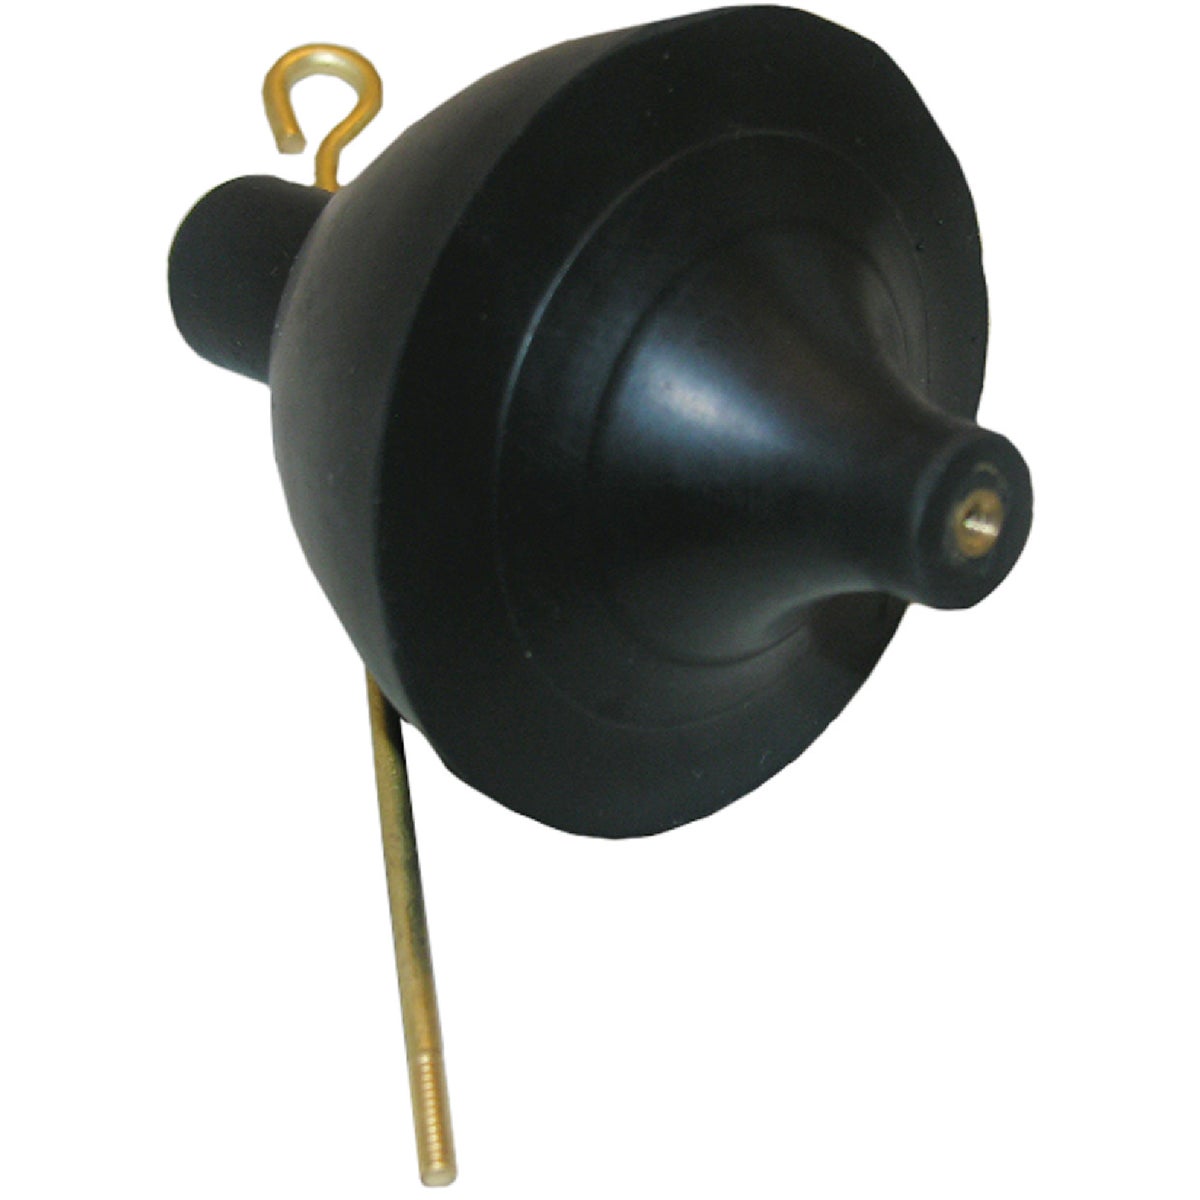 Lasco Toilet Tank Ball with Guide Tip 